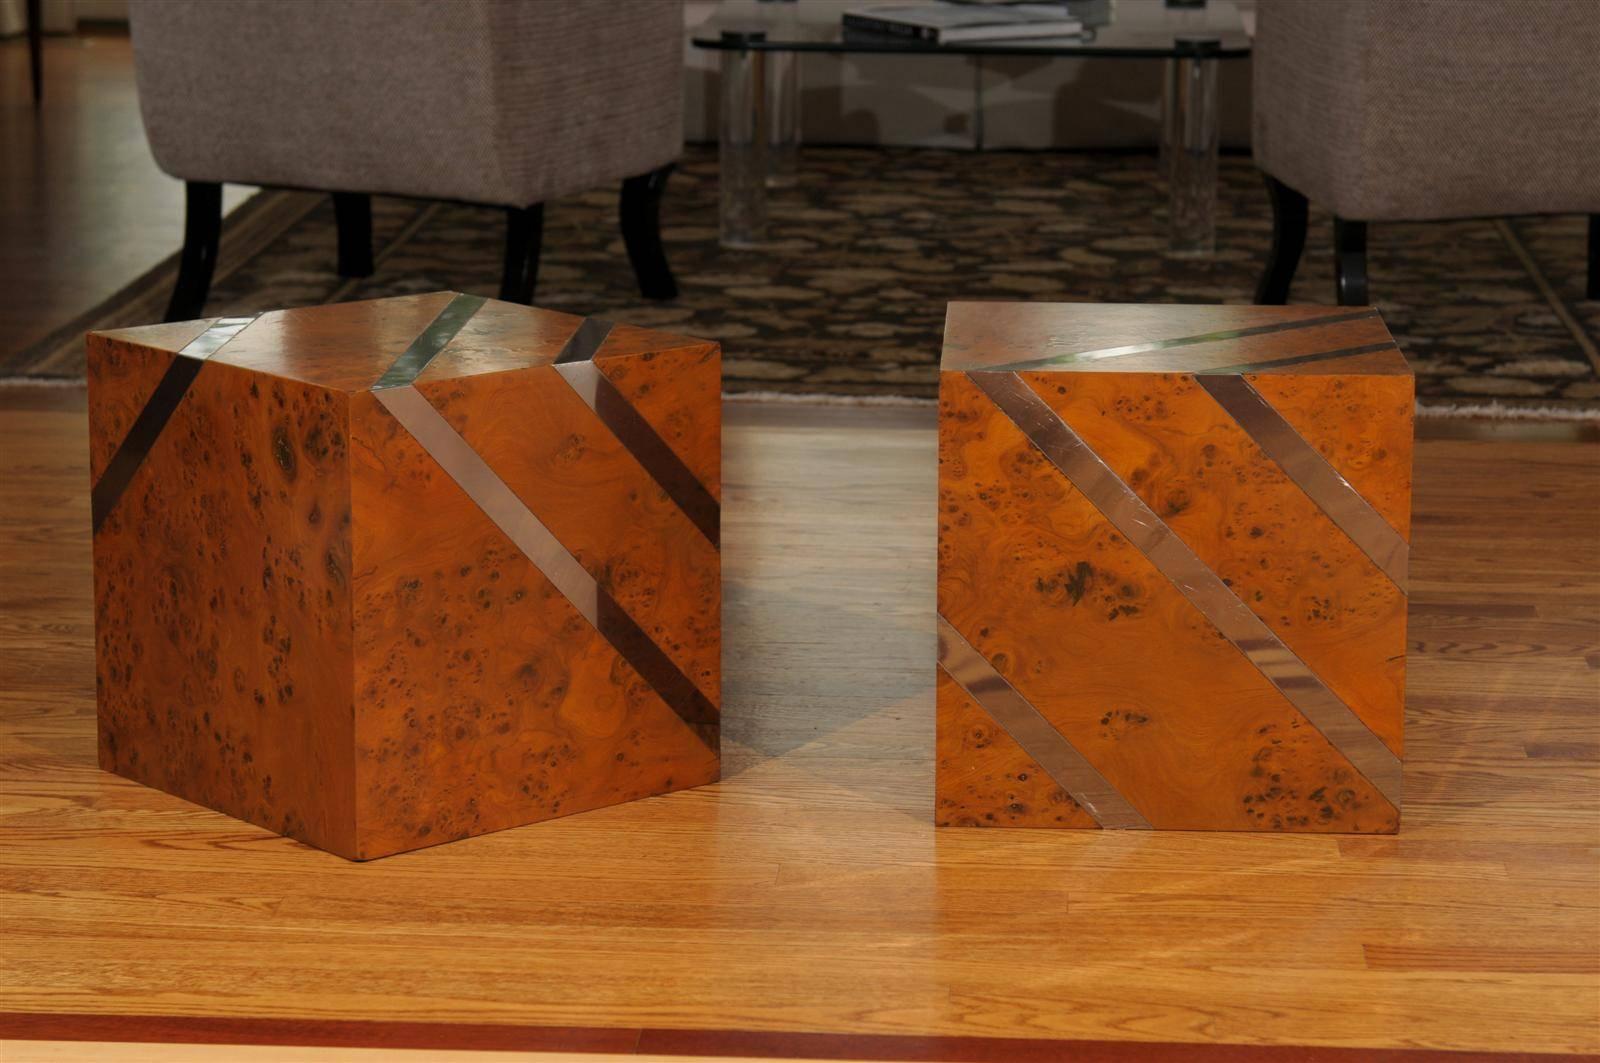 A beautiful pair of vintage cubes. Olivewood veneer over solid hardwood construction with nickel inlay. Finished on all sides, the tables may be rotated to display more or less of the nickel accents. Exquisite design, craftsmanship and materials.